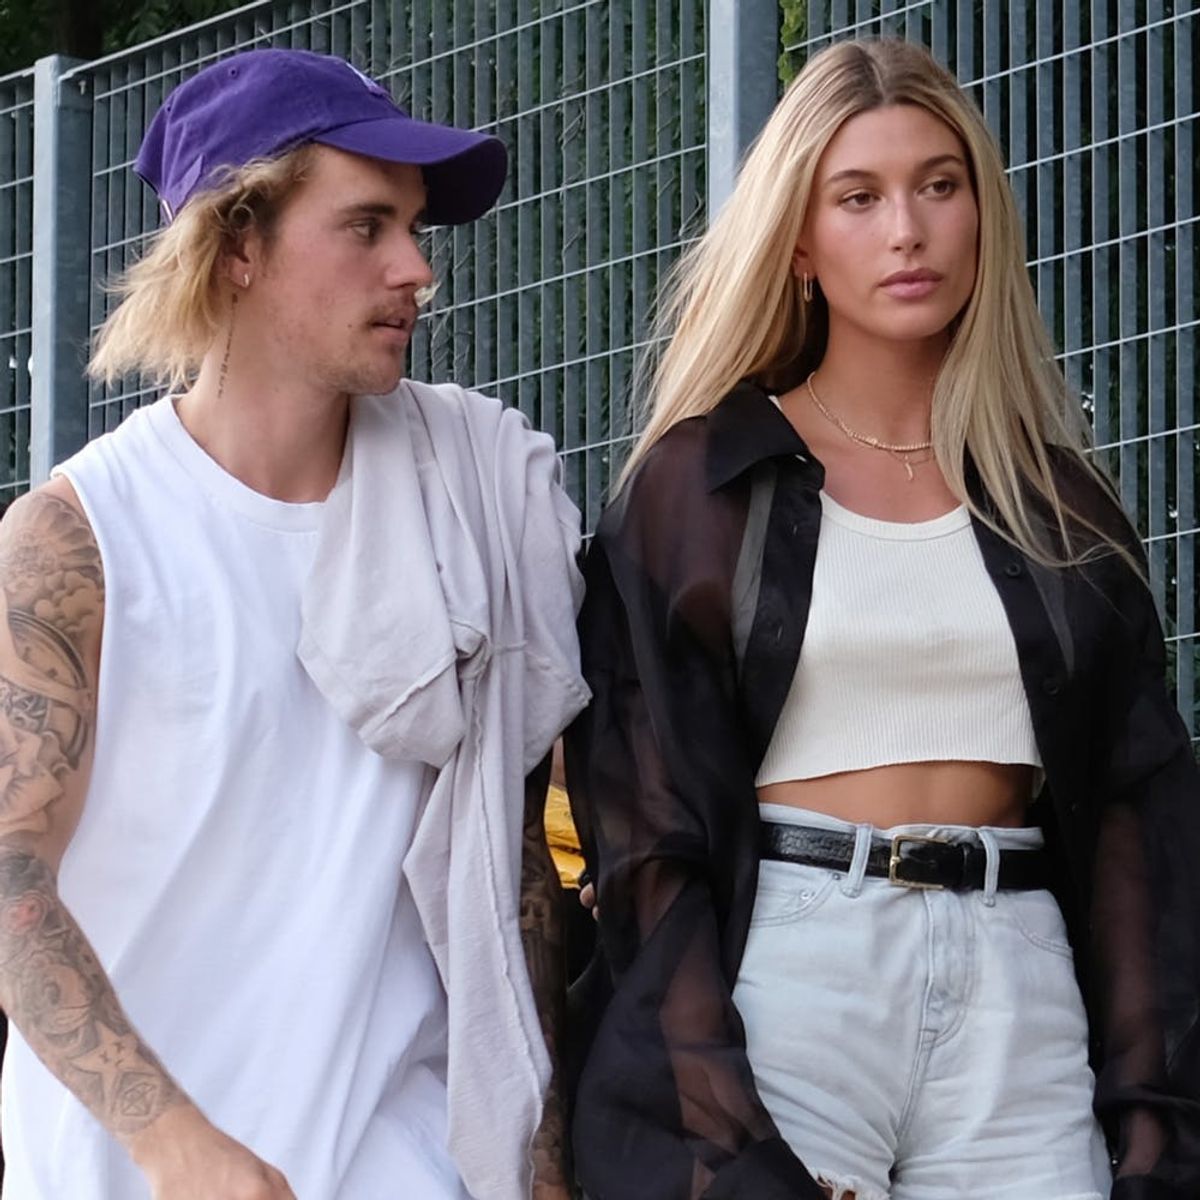 Hailey Baldwin Denies Reports That She and Justin Bieber Are Married Already